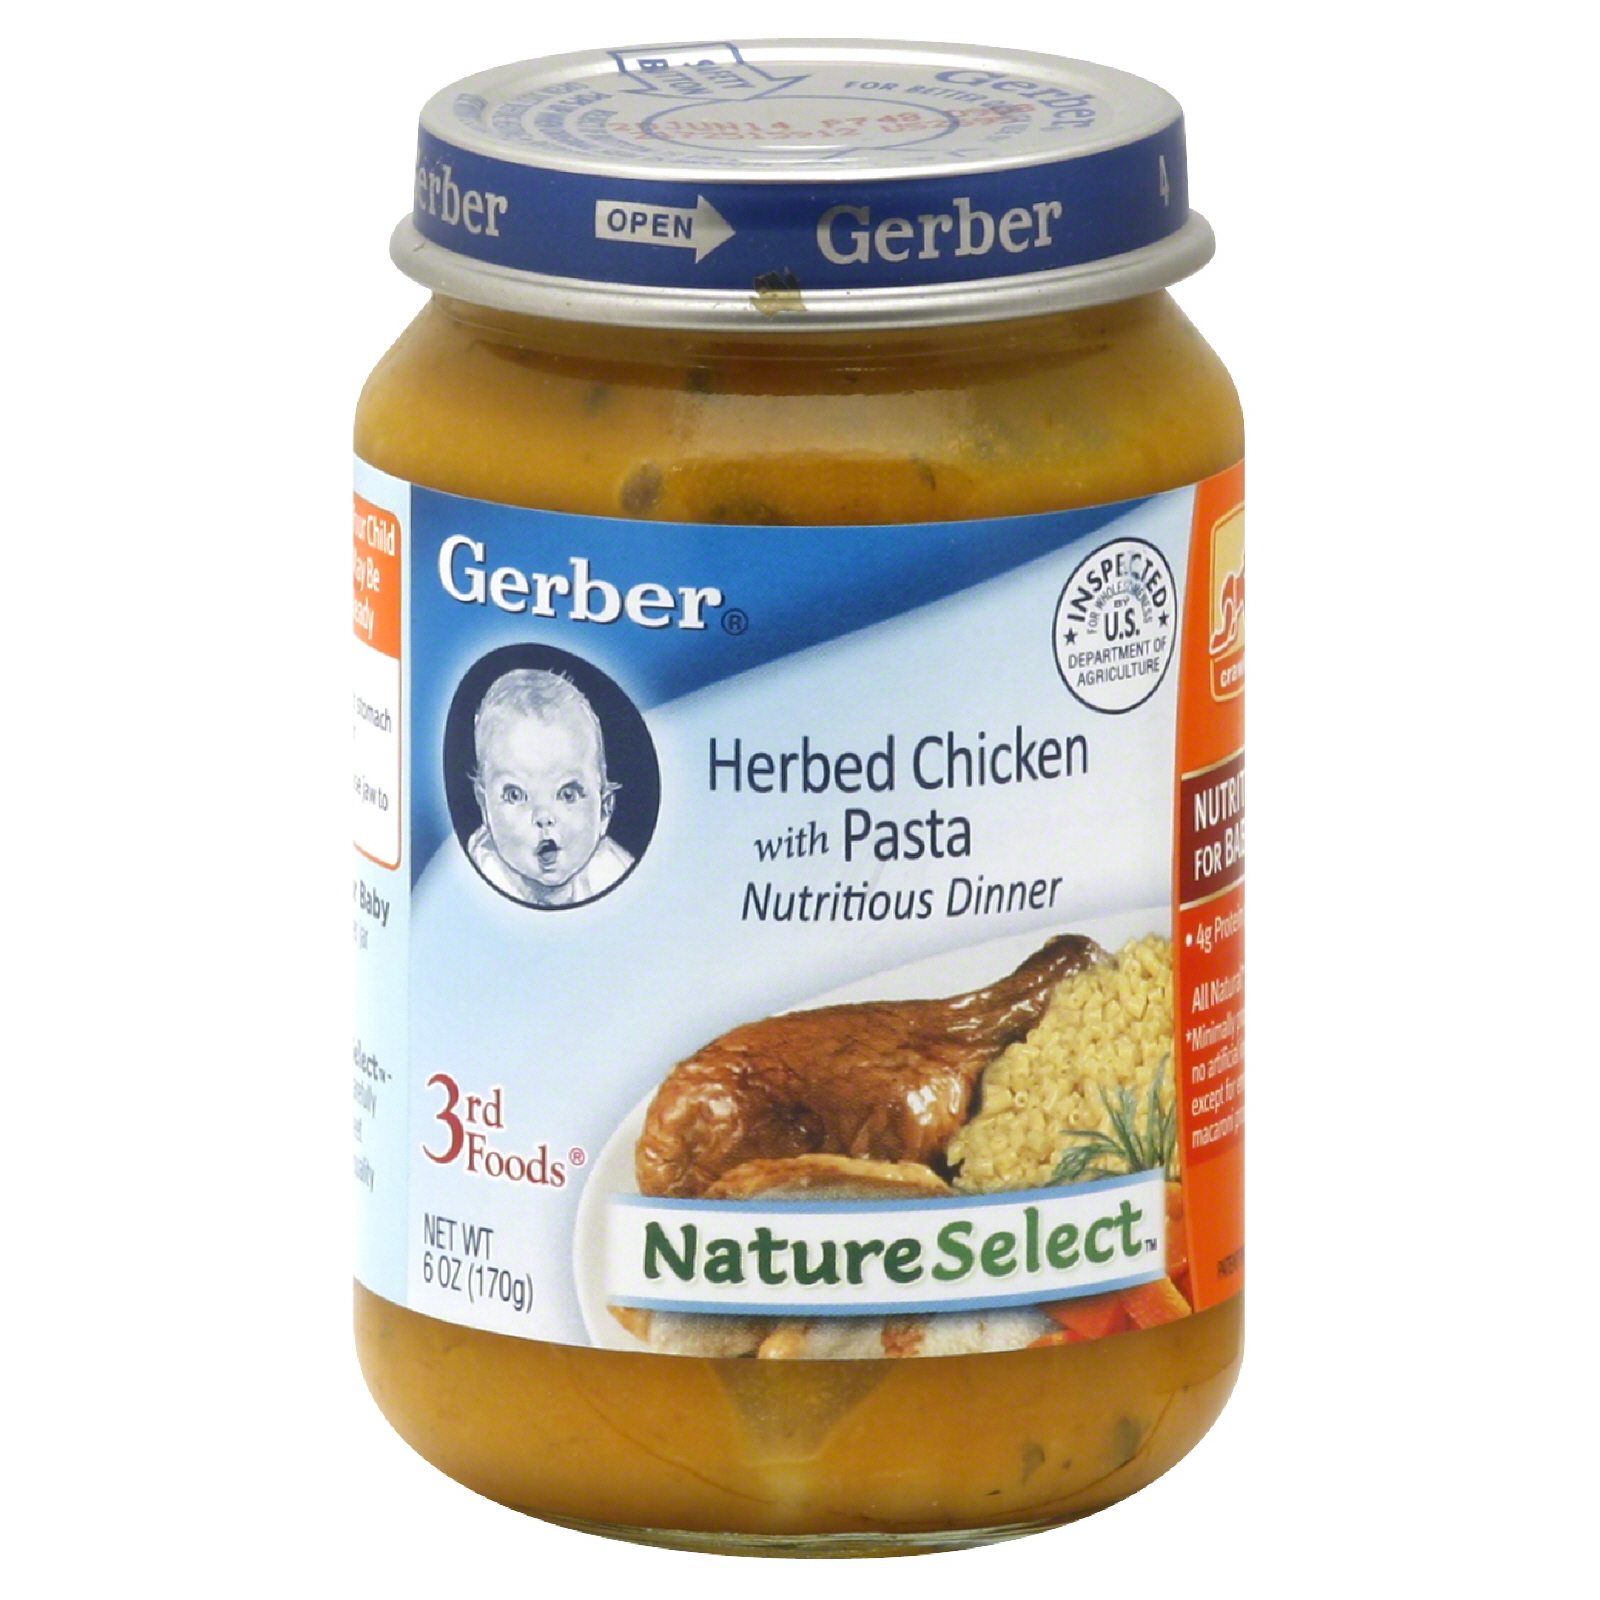 Gerber 3rd Foods Nature Select Herbed Chicken with Pasta 60 oz